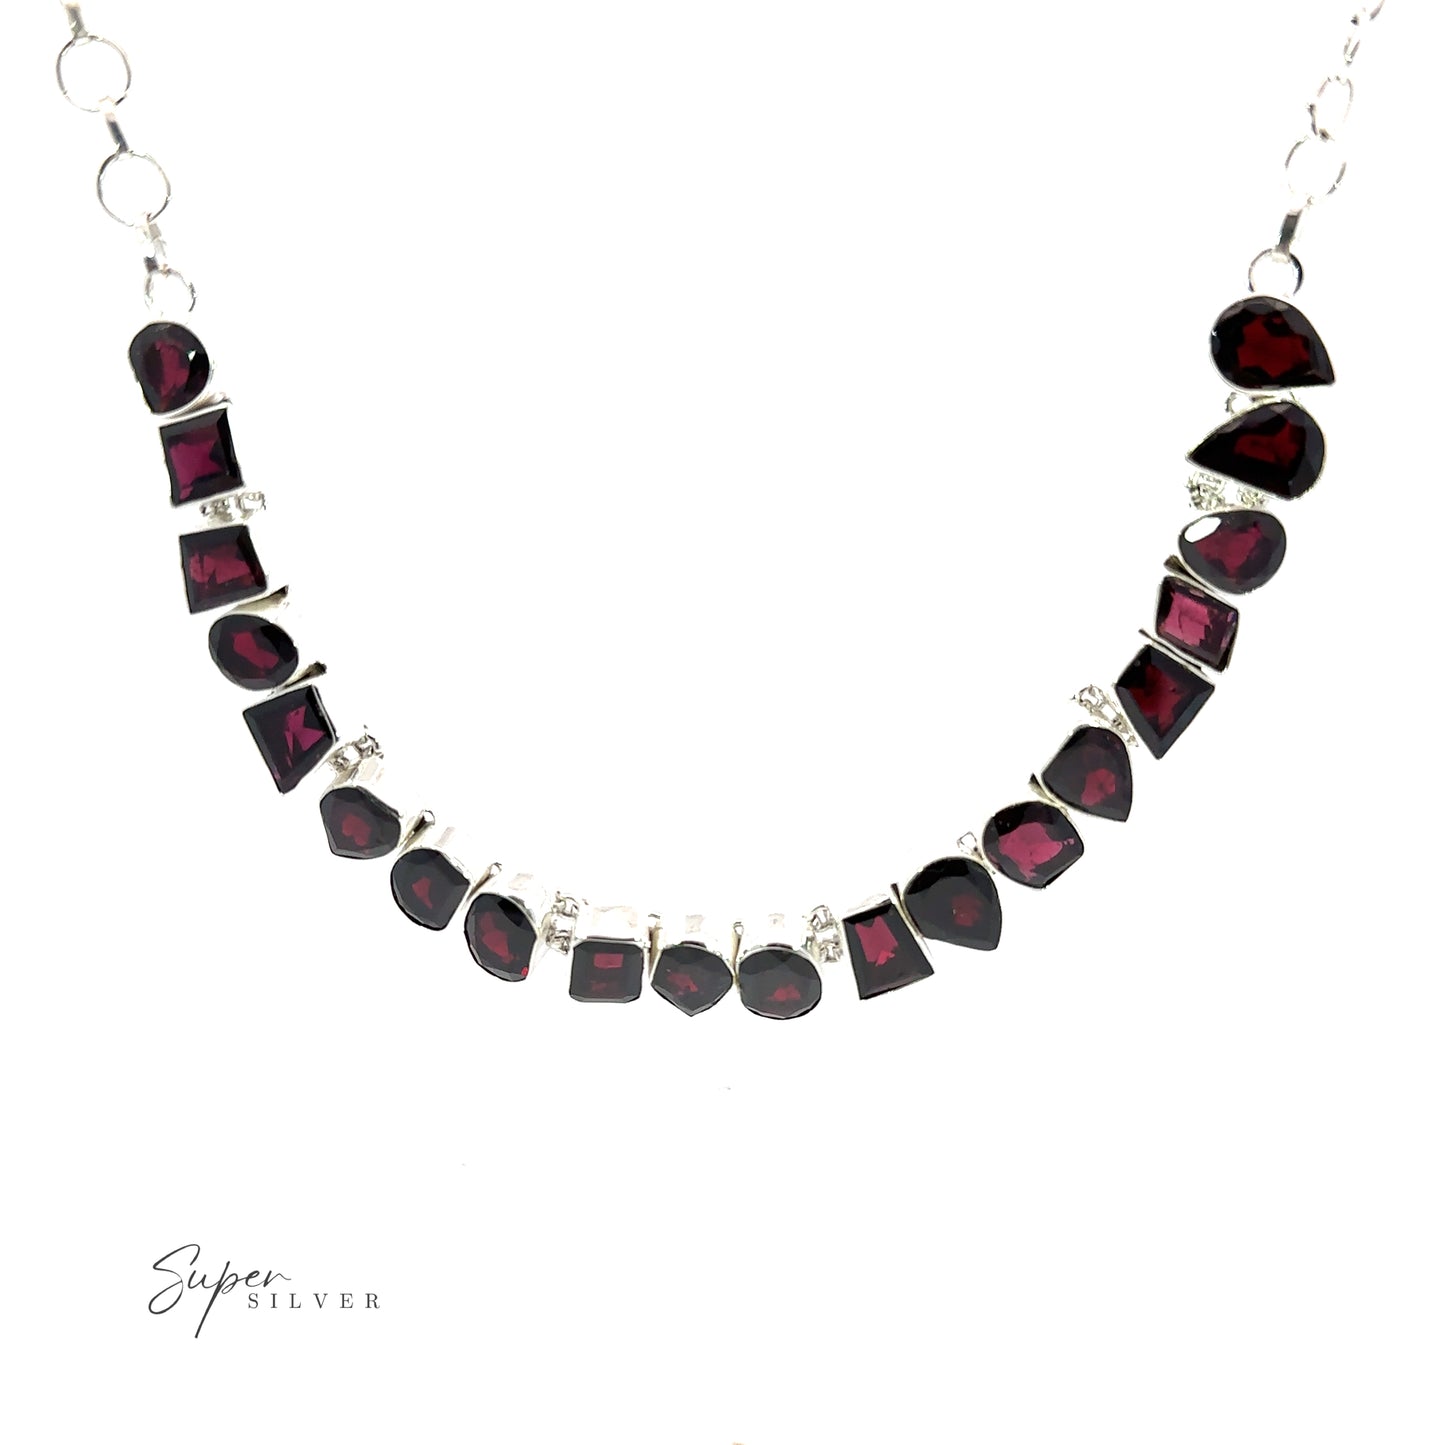 
                  
                    A Statement Gemstone Necklace with variously shaped red stones, including garnet, arranged in a semi-circle, is displayed against a white background. The text "Super Silver" is visible in the bottom left corner.
                  
                